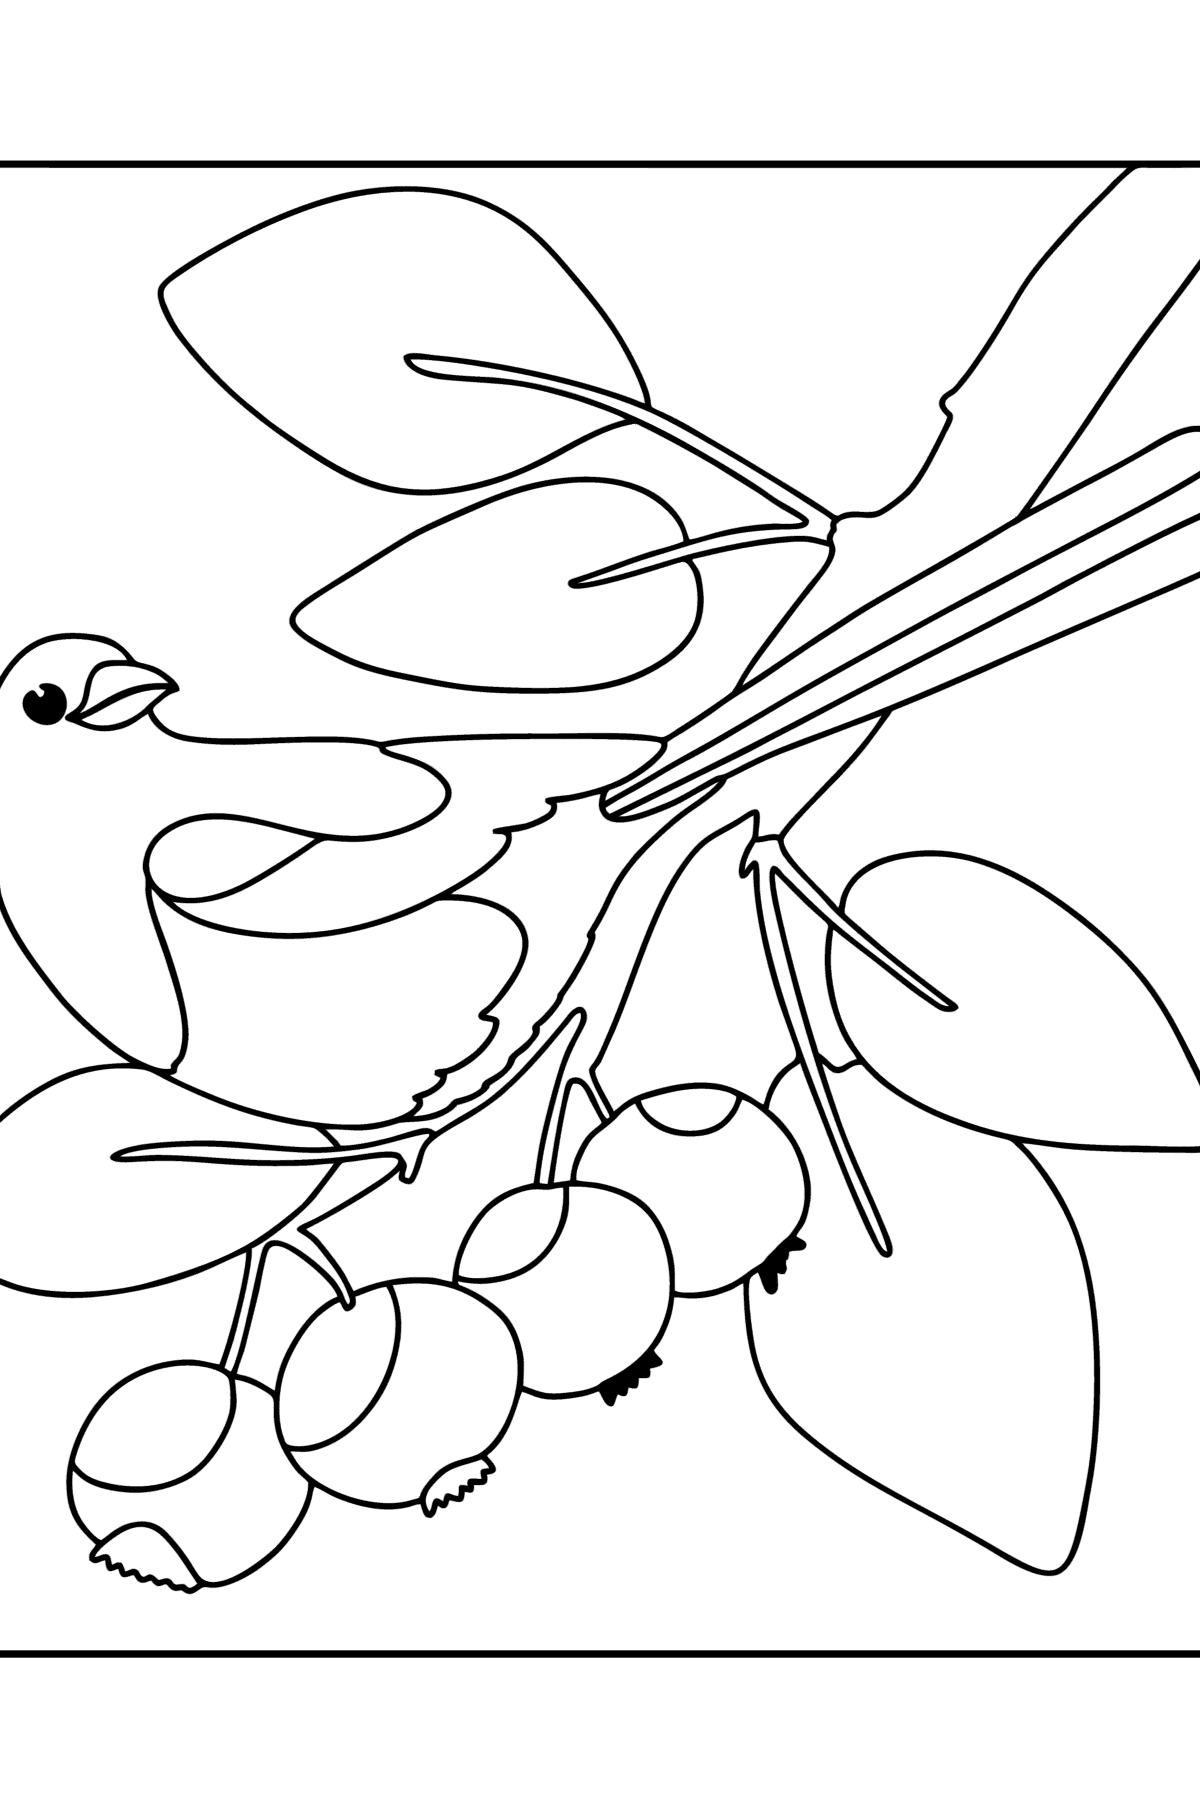 Magpie in the forest сoloring page - Coloring Pages for Kids